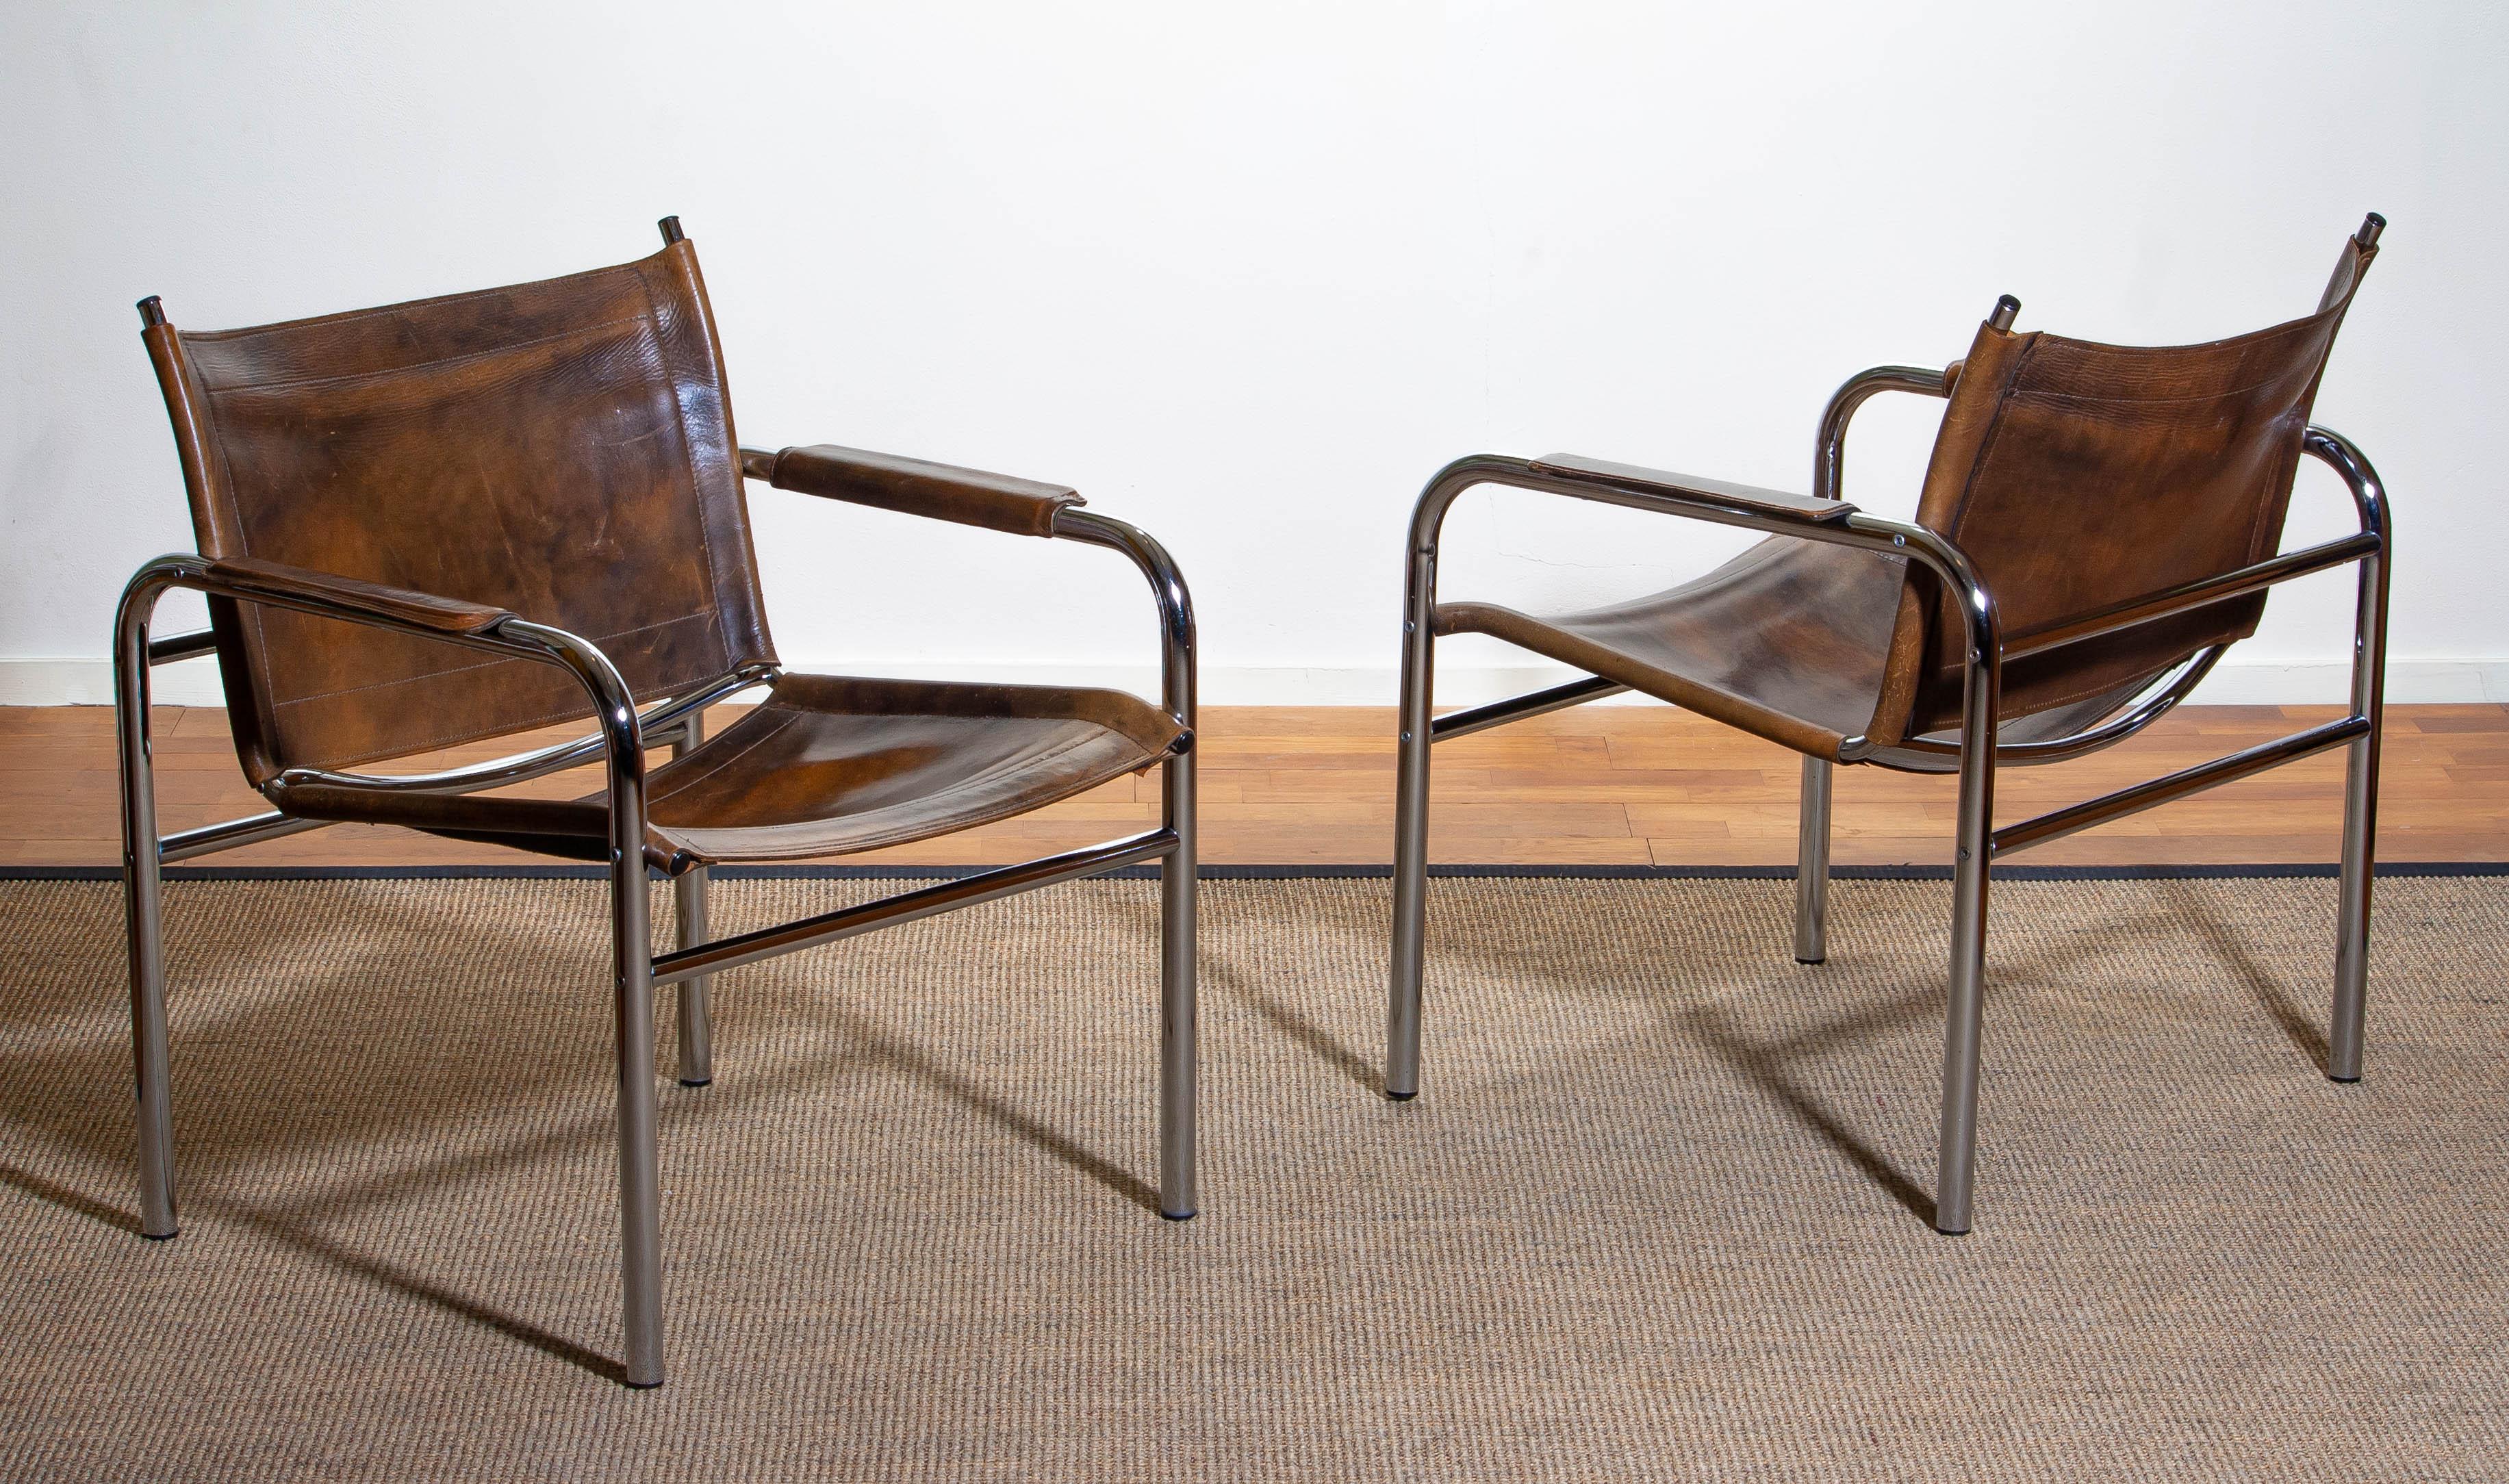 1980s, Pair of Leather and Tubular Steel Armchairs by Tord Bjorklund, Sweden  1